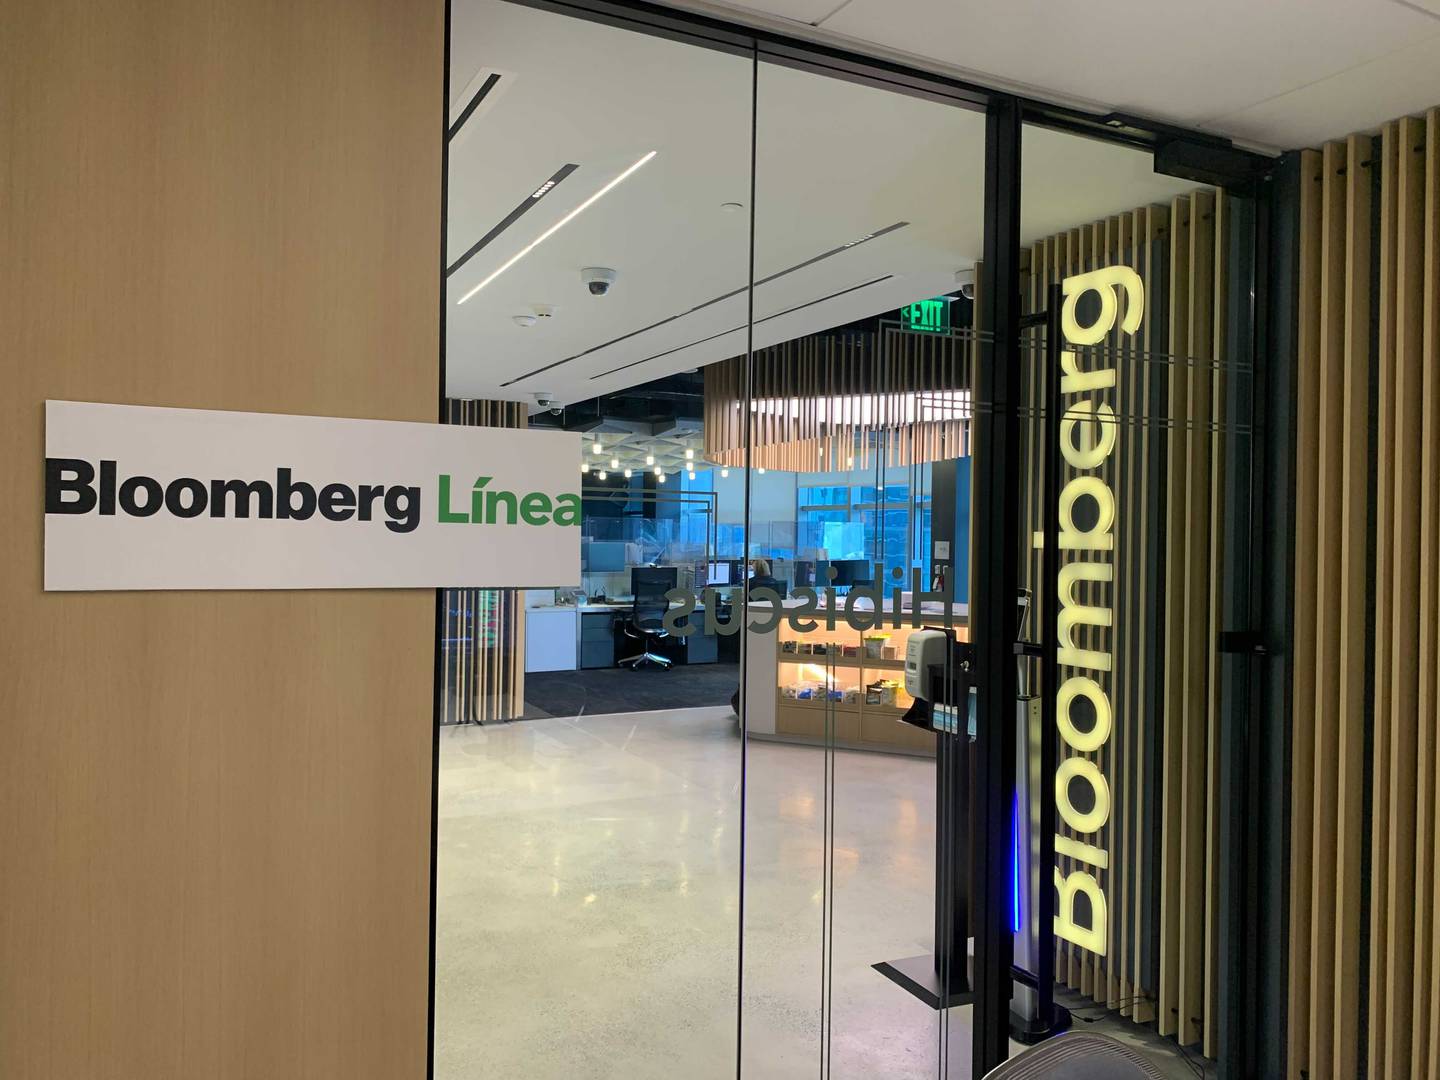 Bloomberg LP office in Miami, FL during Bloomberg Línea launch press conference with Kaio Philipe, Co-founder and COO, and Carlos Rodriguez, Bloomberg LP Executive Producer